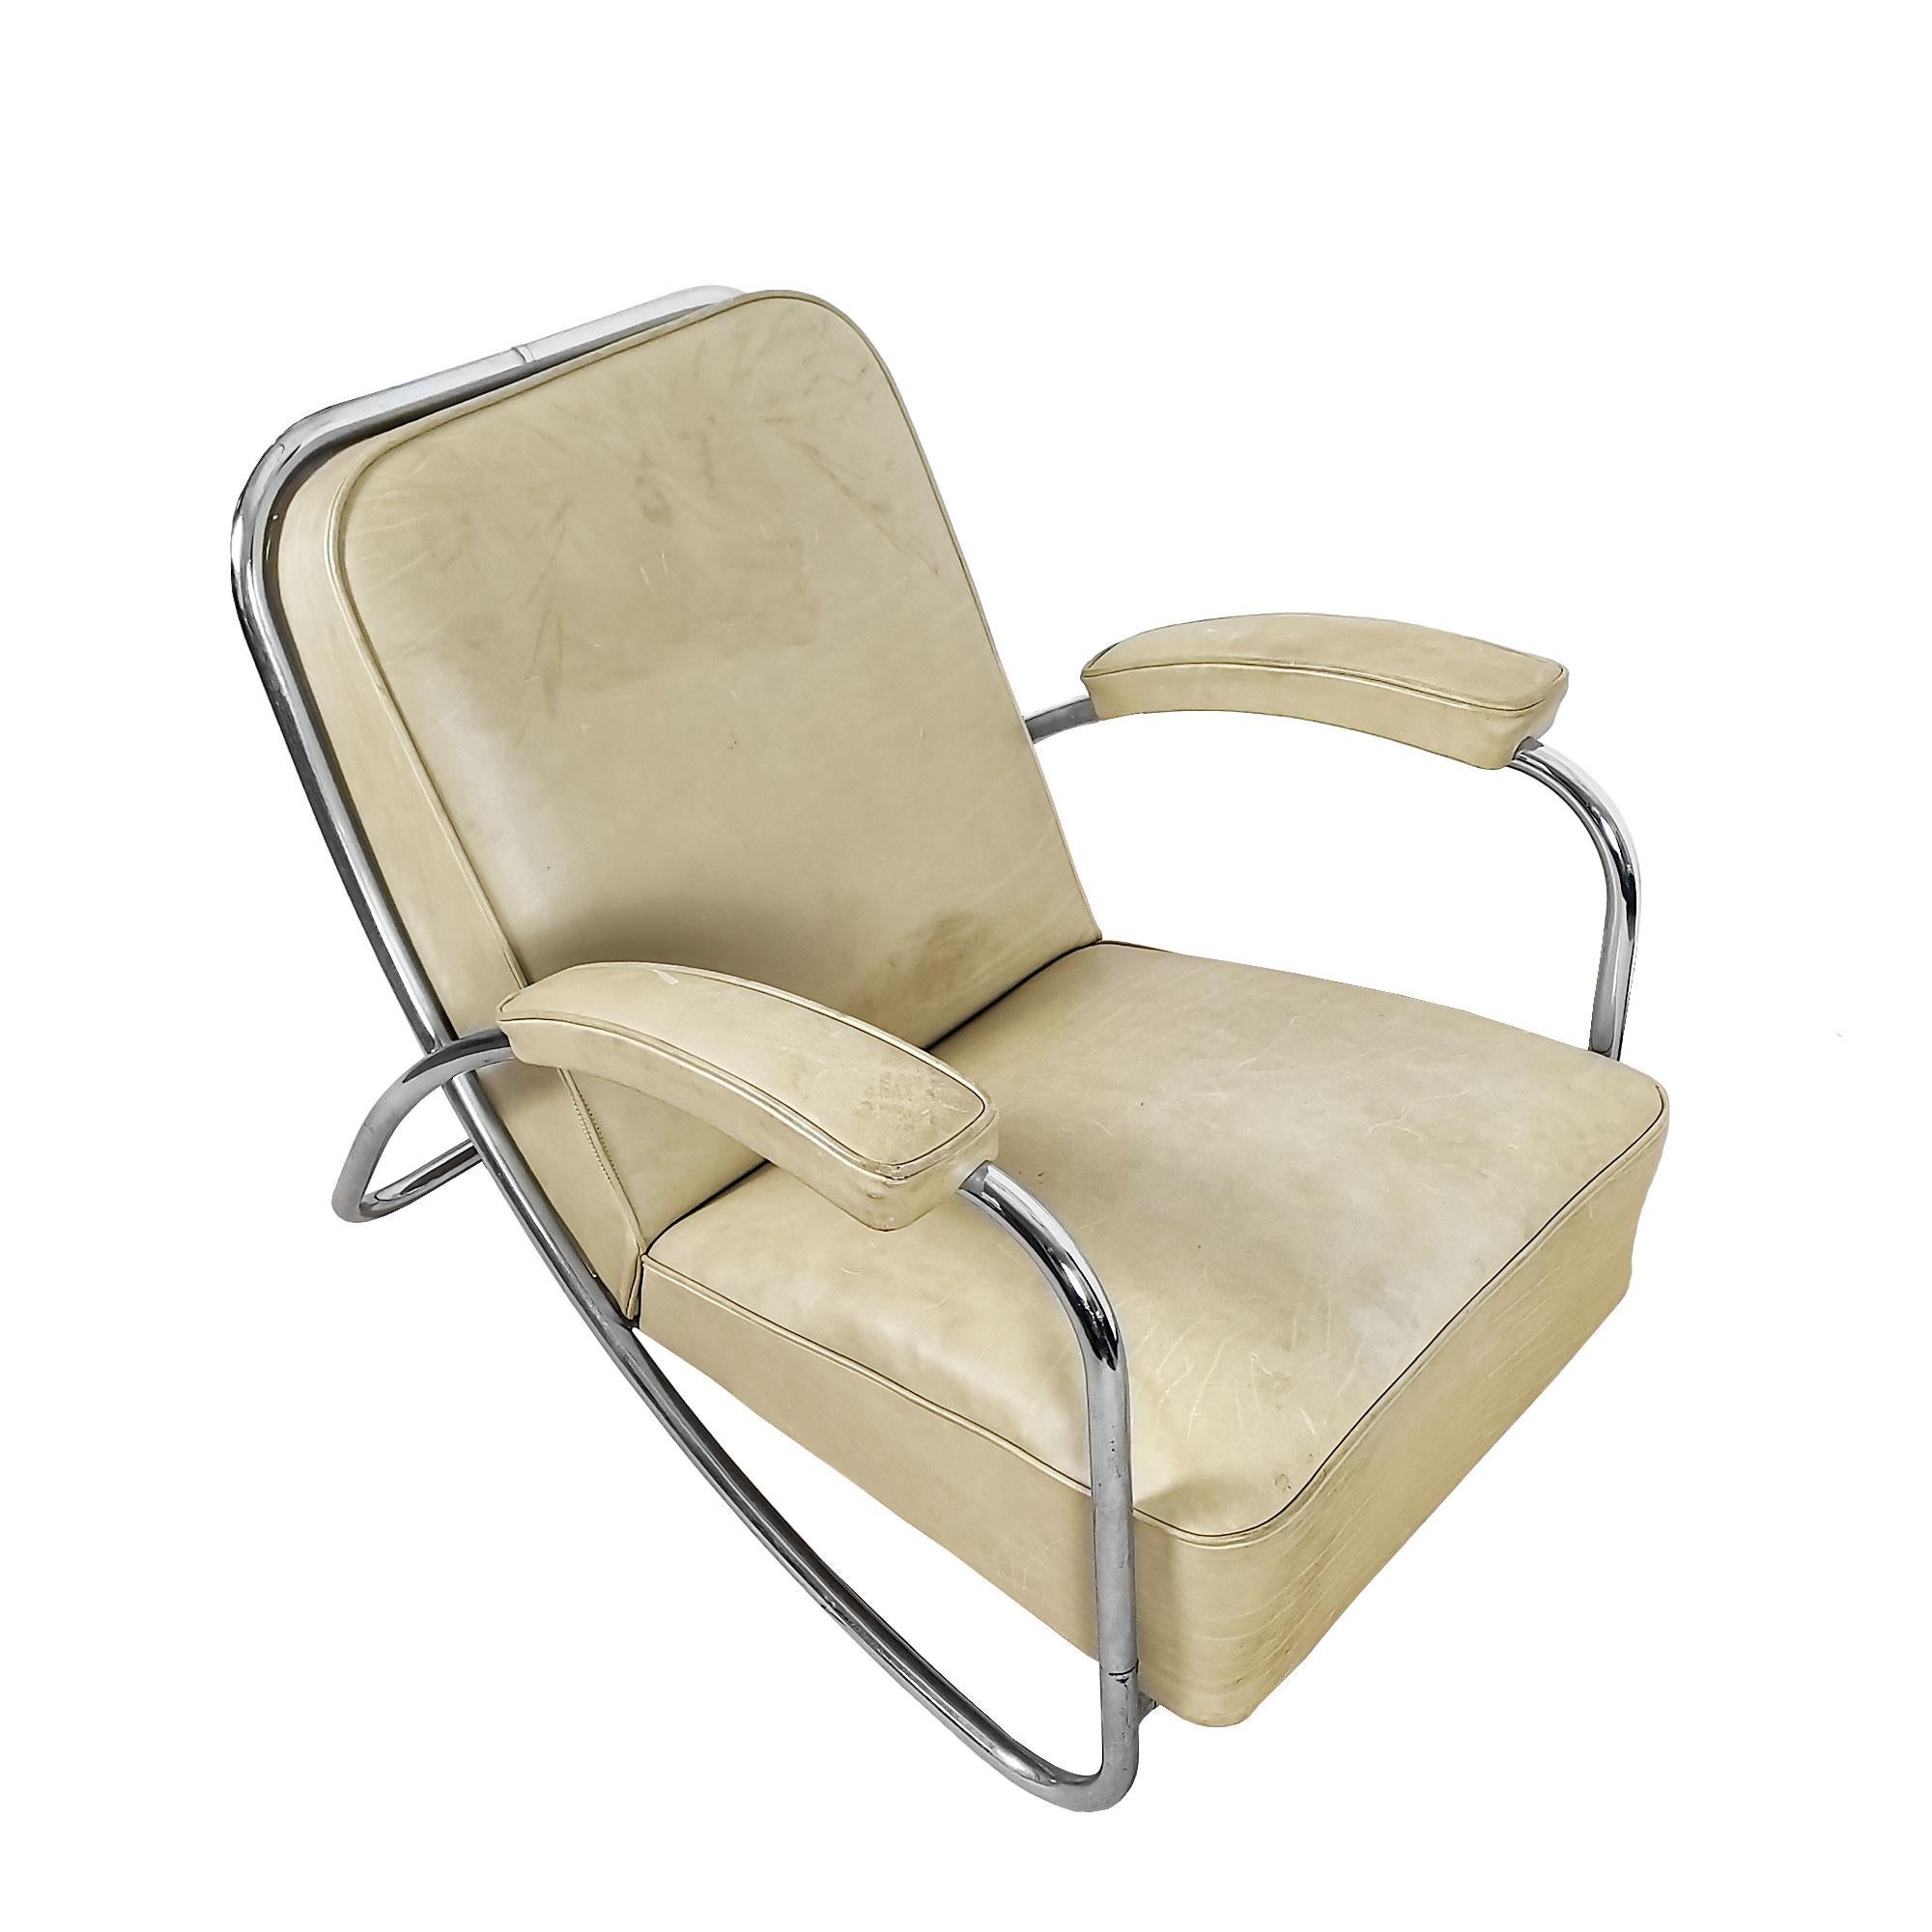 Plated 1920s Armchair from Bauhaus Movement, Tubular Structure and Leather - Germany